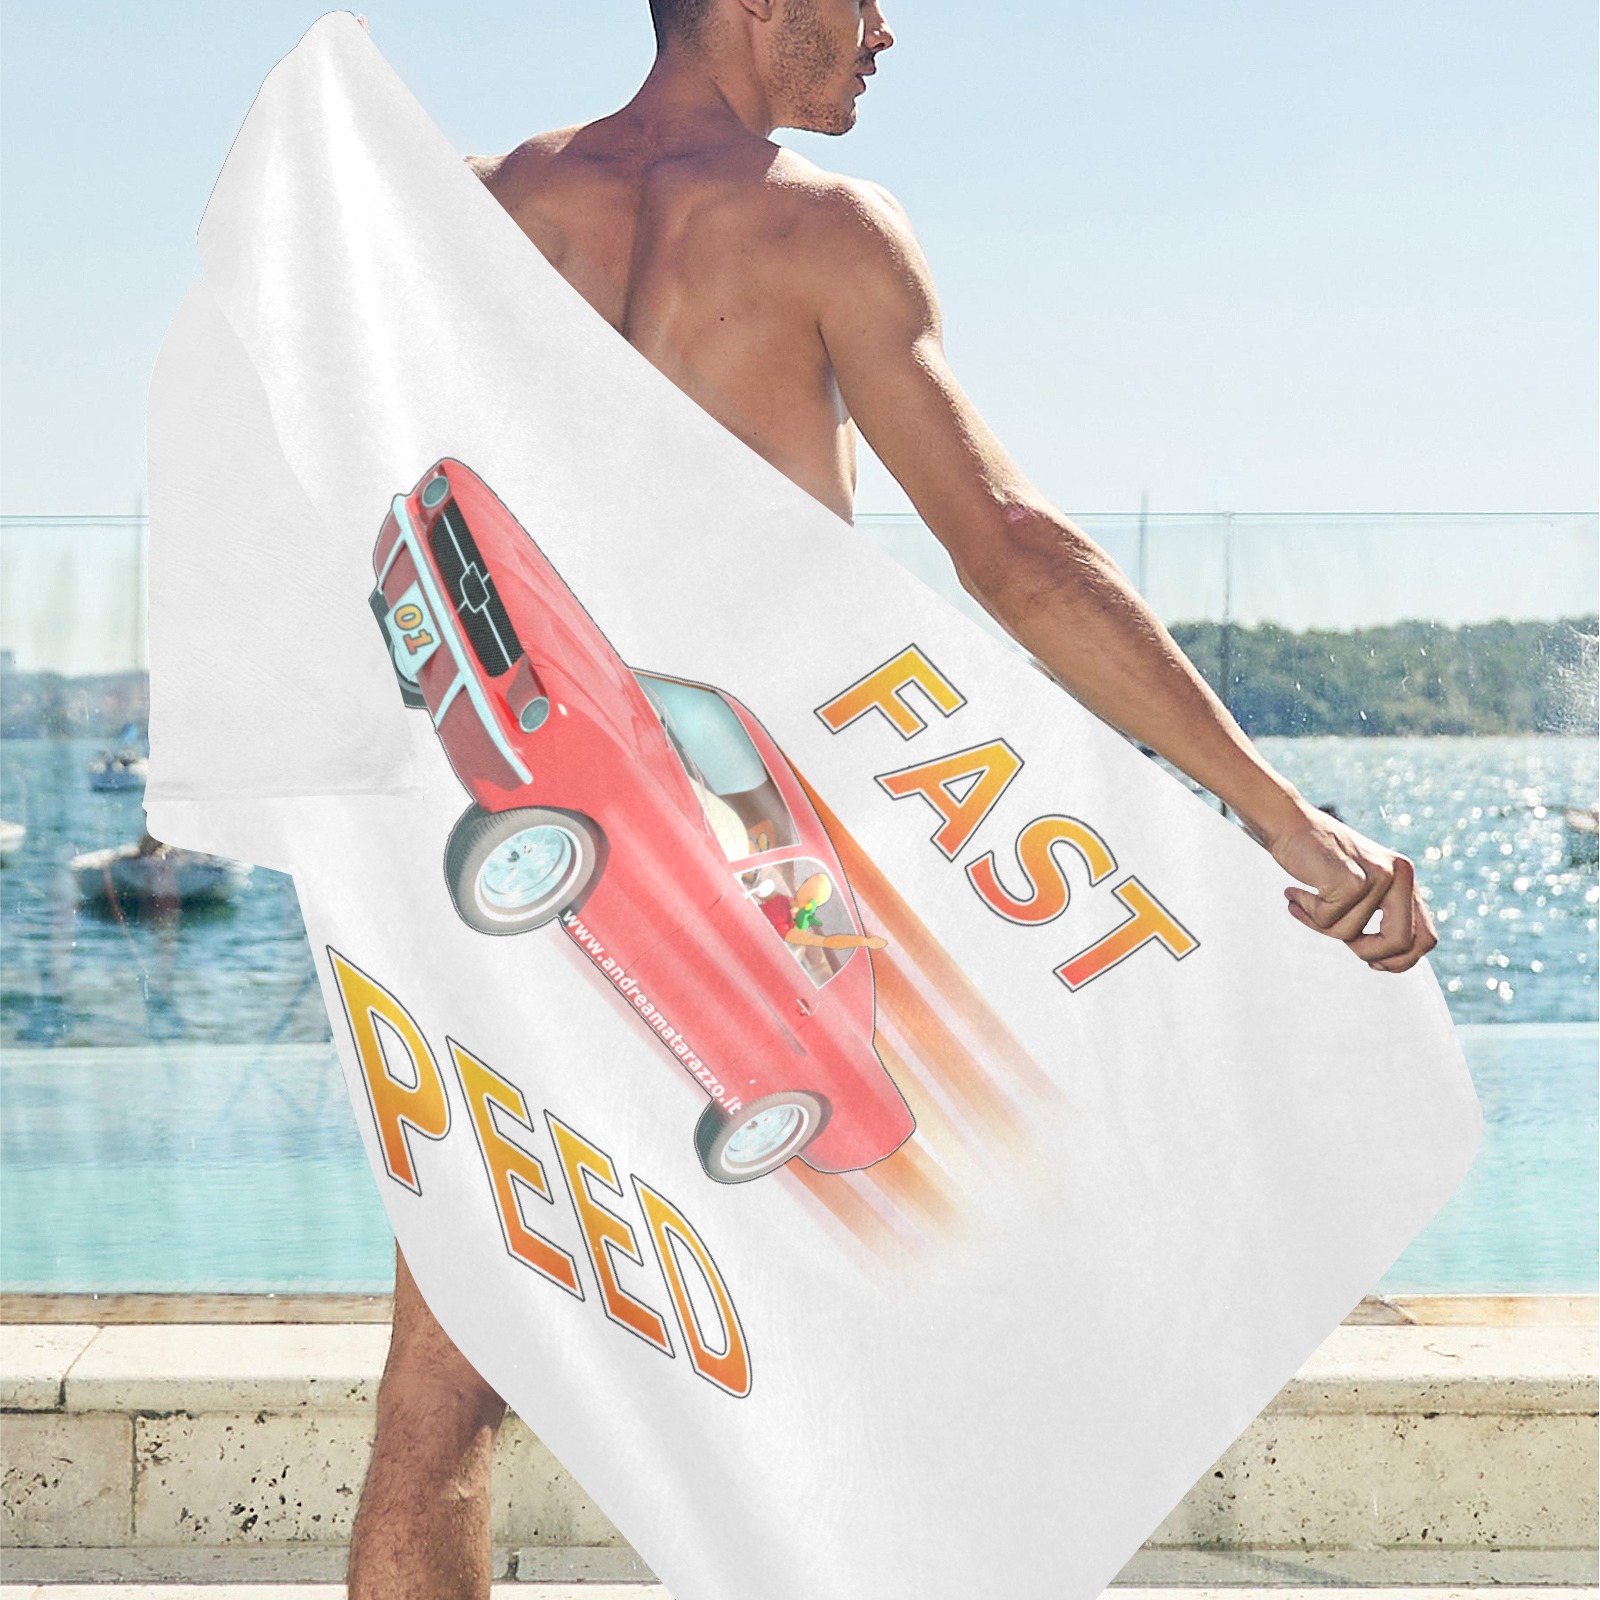 Fast and Speed 01 Beach Towel 30"x 60"